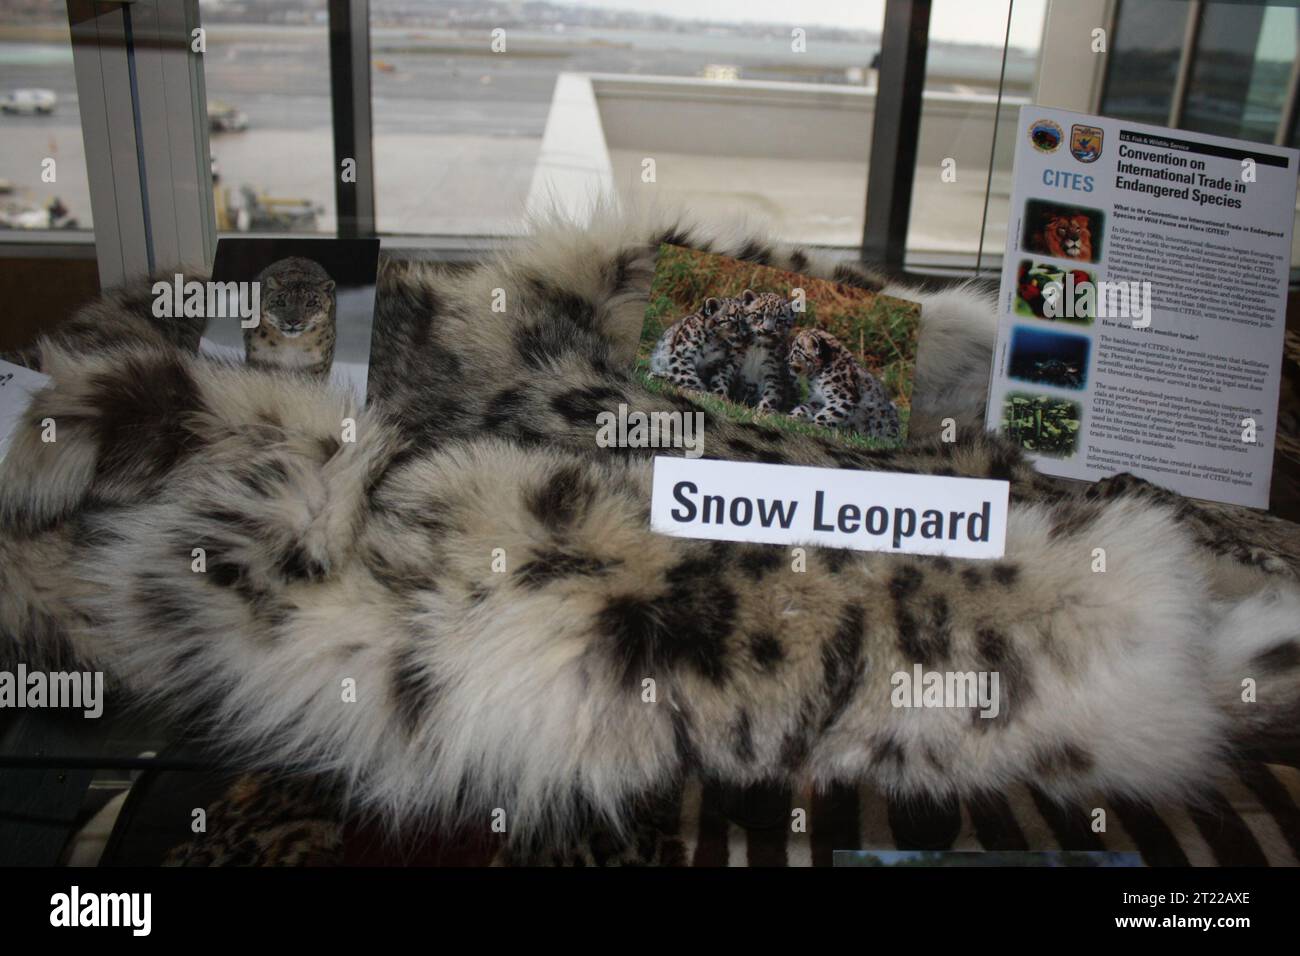 A snow leopard skin on display as part of the Service's 'Buyer Beware' exhibit located in Logan airport, Boston, MA. The exhibit is designed to educate travelers about the hazards of purchasing wildlife products abroad that are made from endangered or pro. Subjects: Law enforcement; Exhibits; Endangered species. Location: Massachusetts.  . 1998 - 2011. Stock Photo